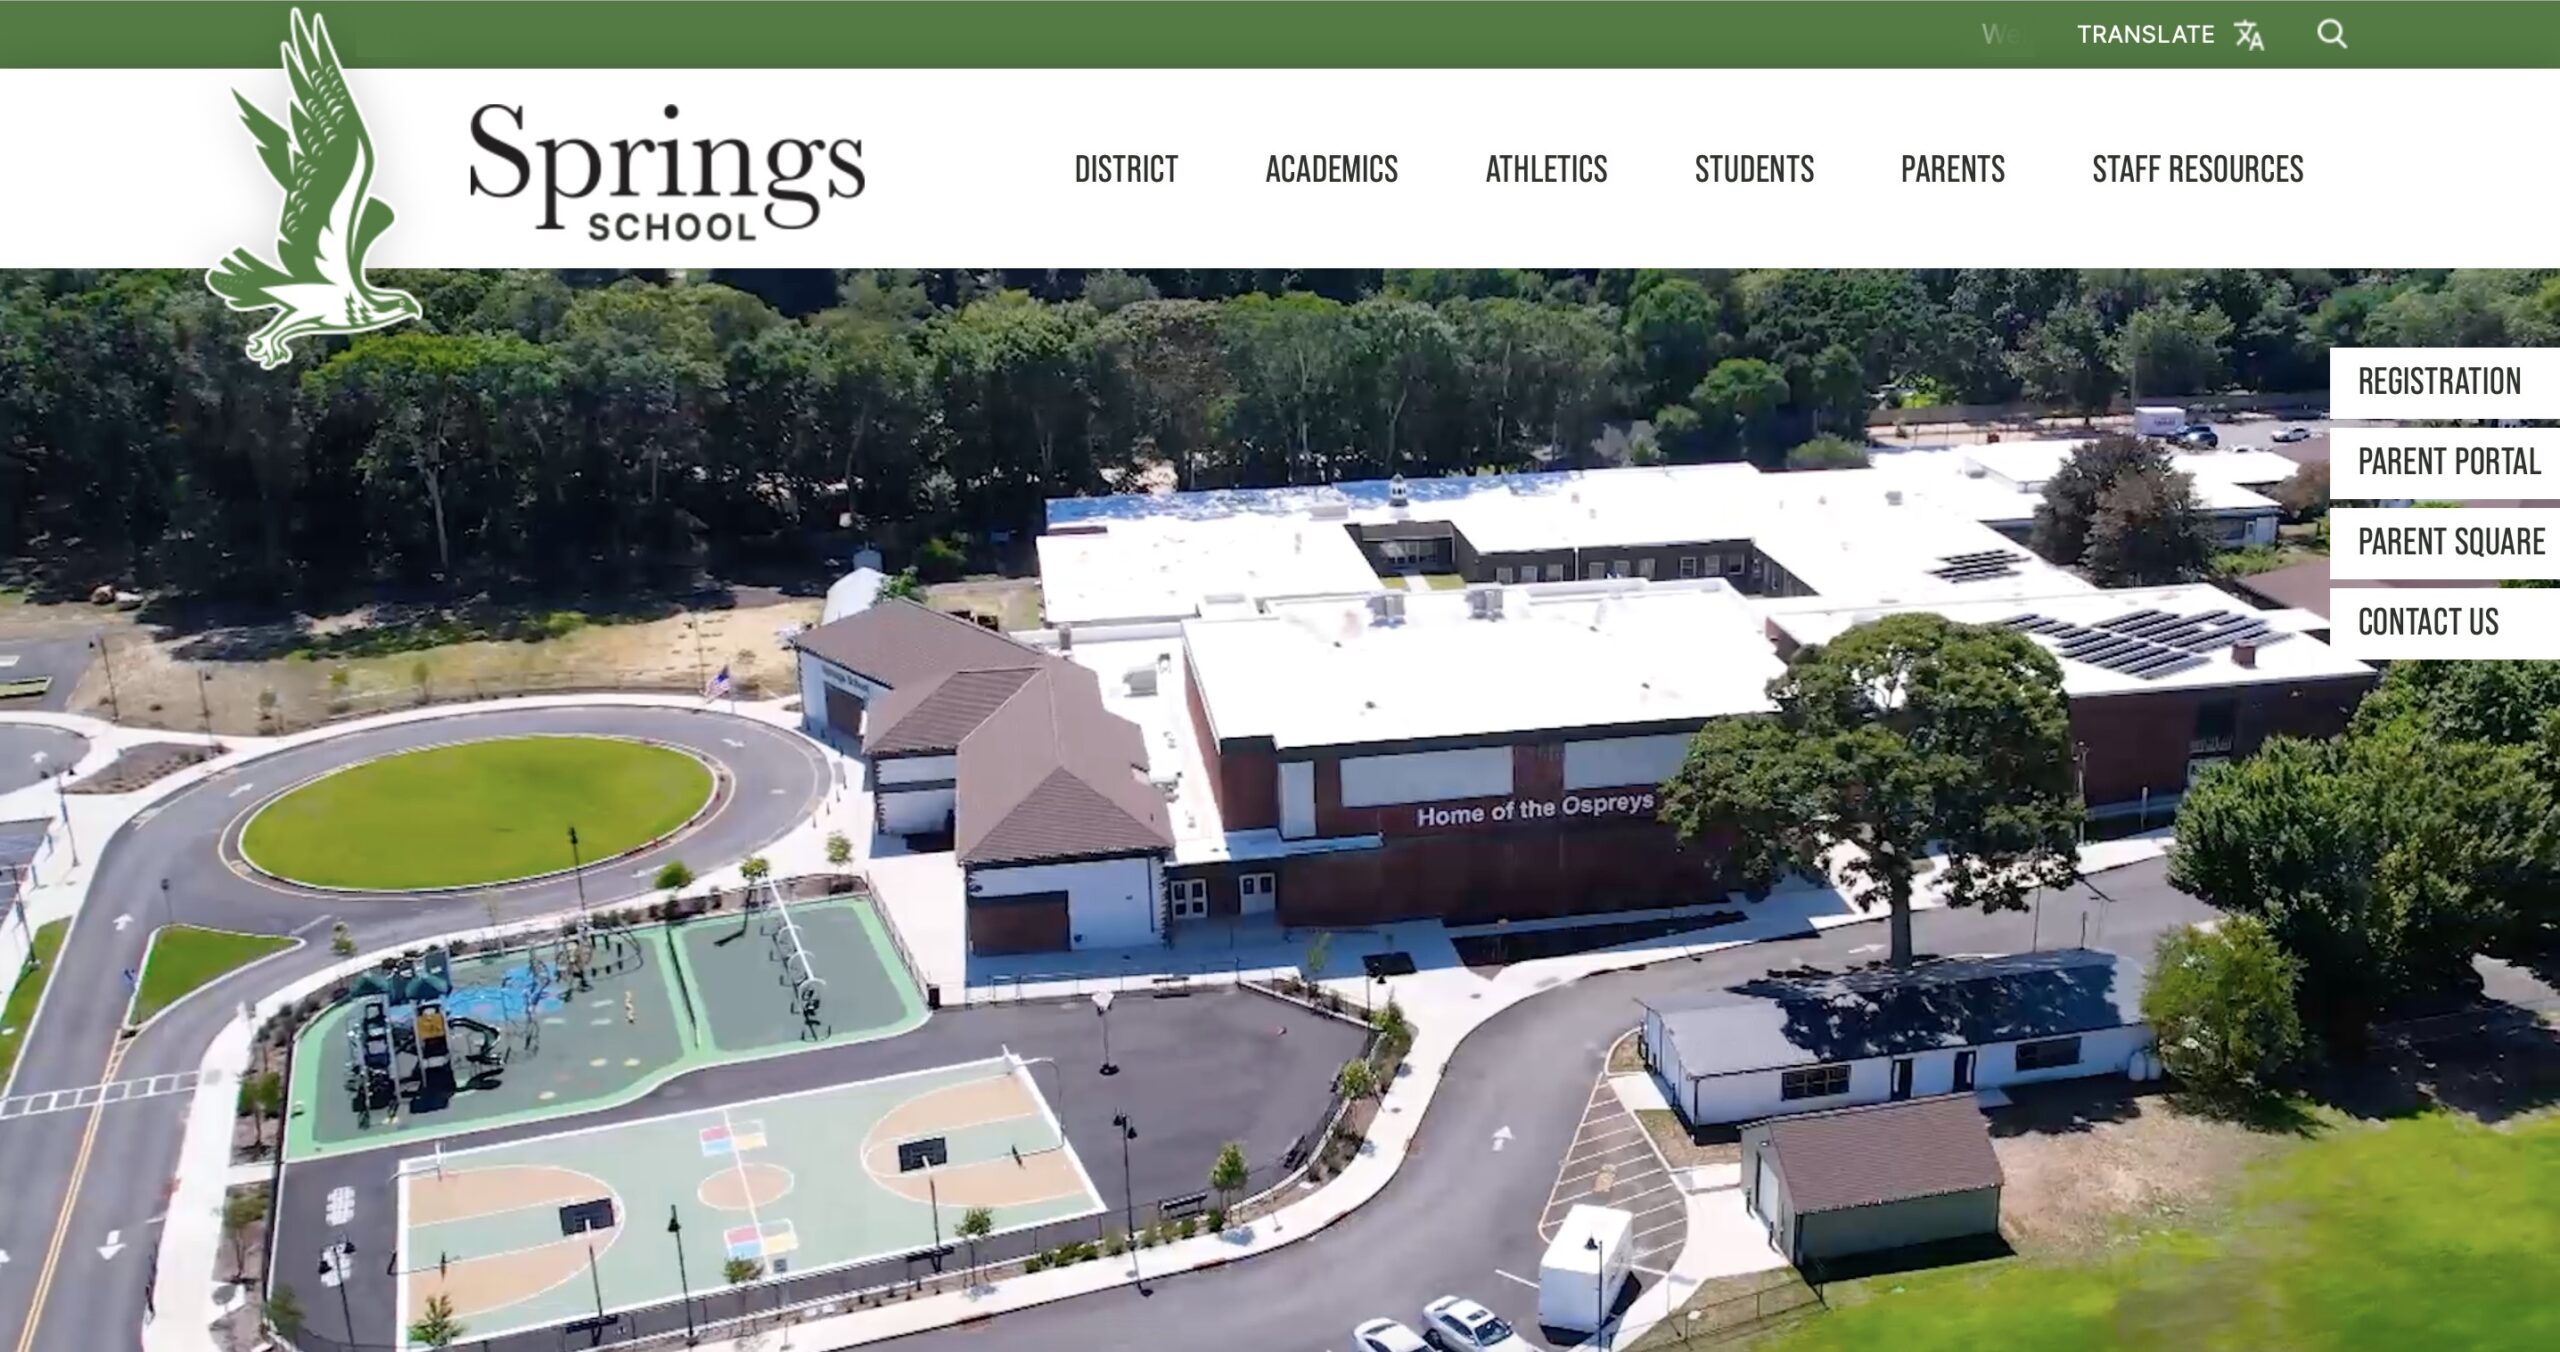 Springs School District's updated website includes features that ease use and communication.